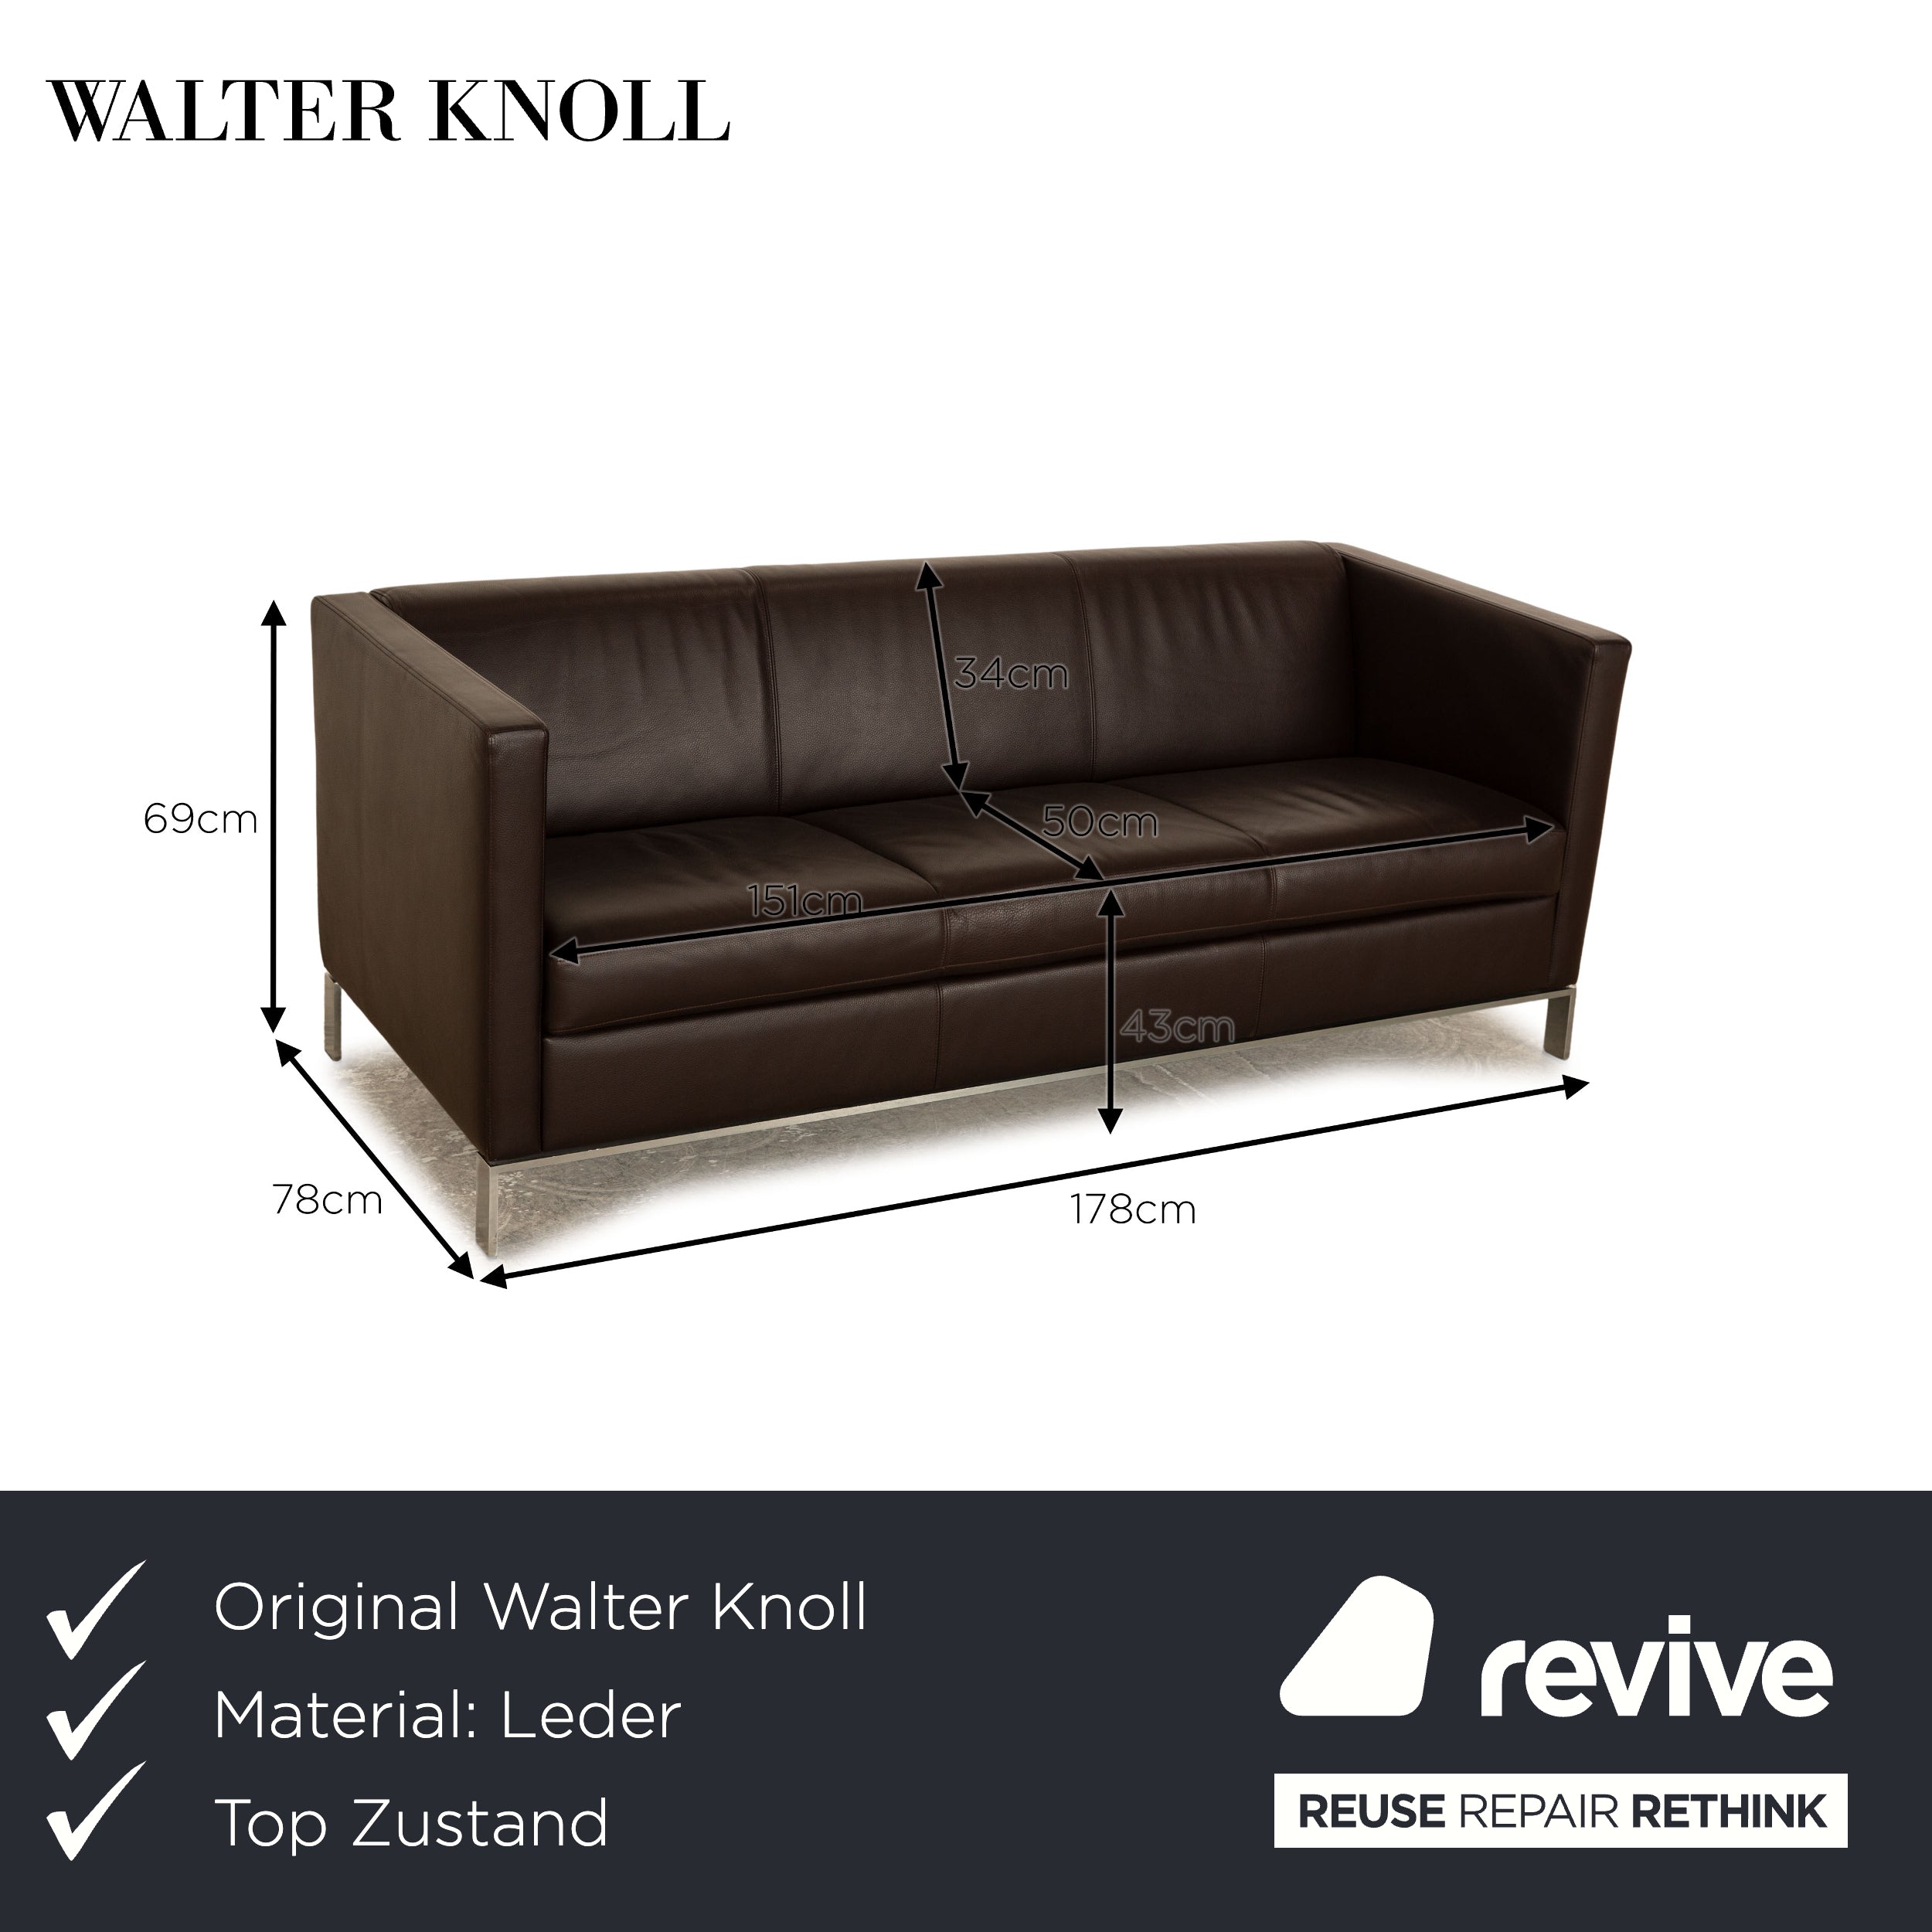 Walter Knoll Foster 501 Leather Three Seater Brown Sofa